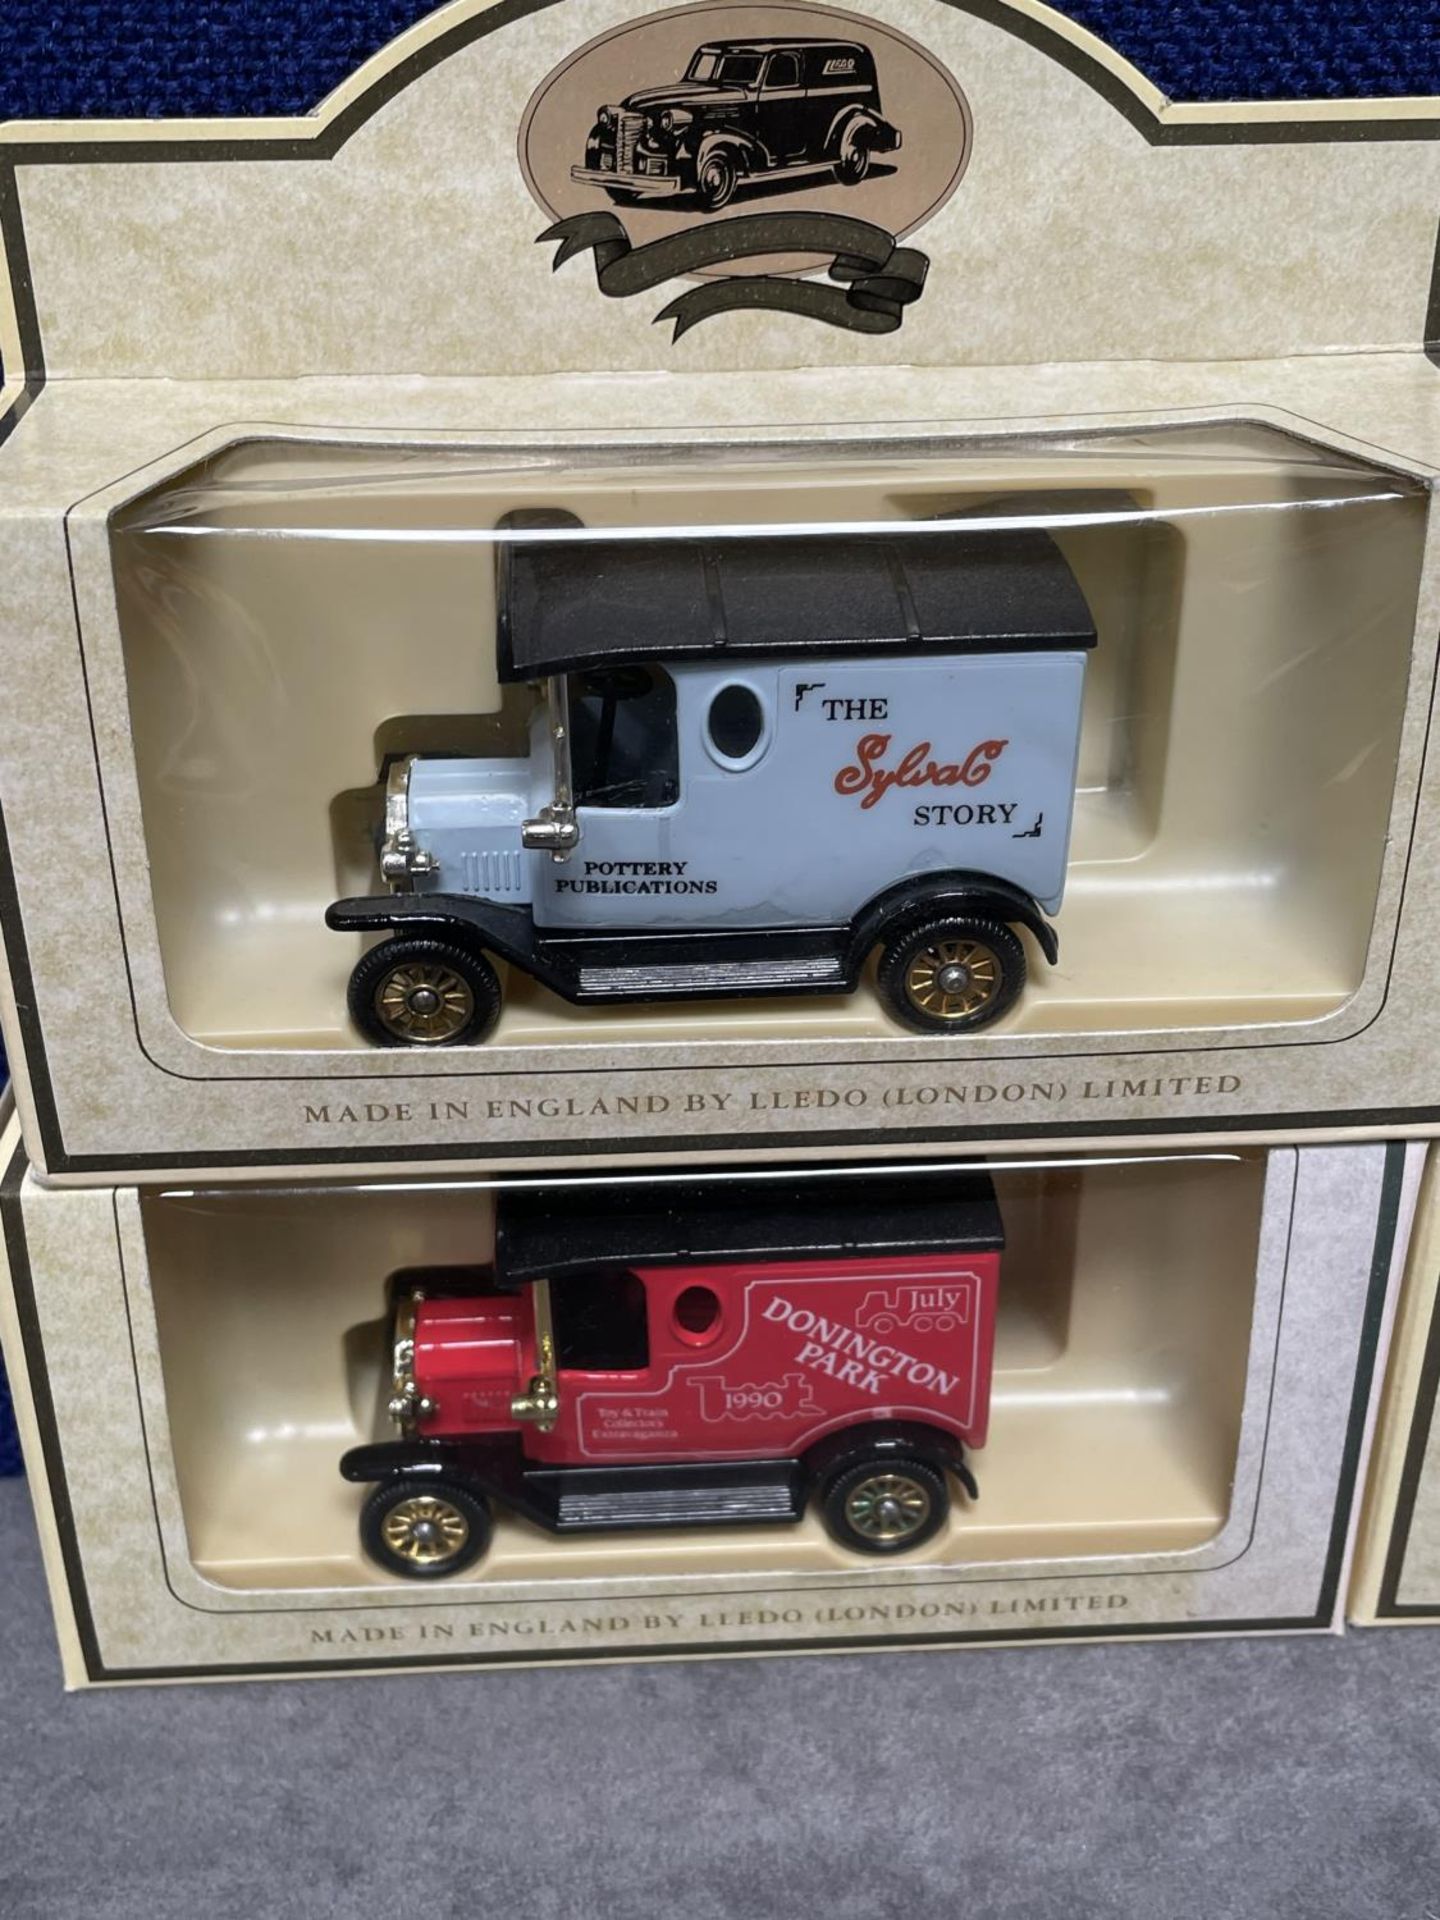 5 x Lledo Diecast Vehicles Individually Boxed Advertising Stoneleigh Toy Extravaganza / Walsall - Image 2 of 4